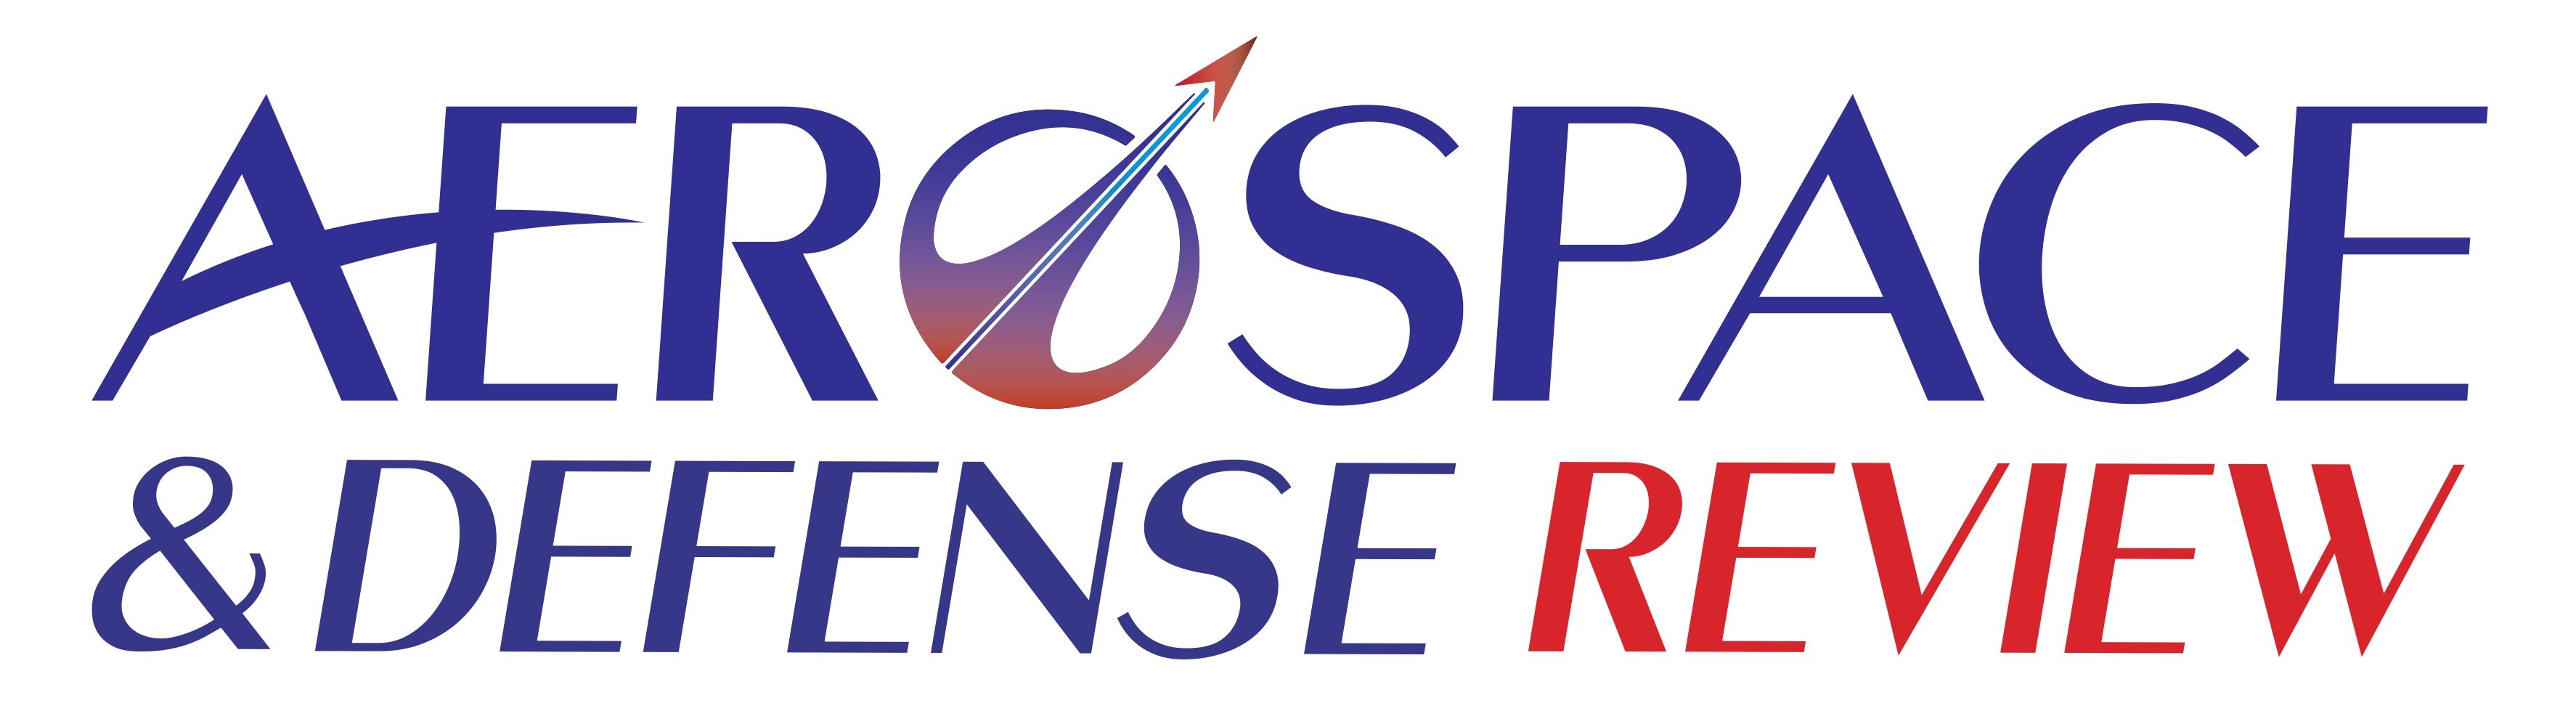 Aerospace Defence & Review 